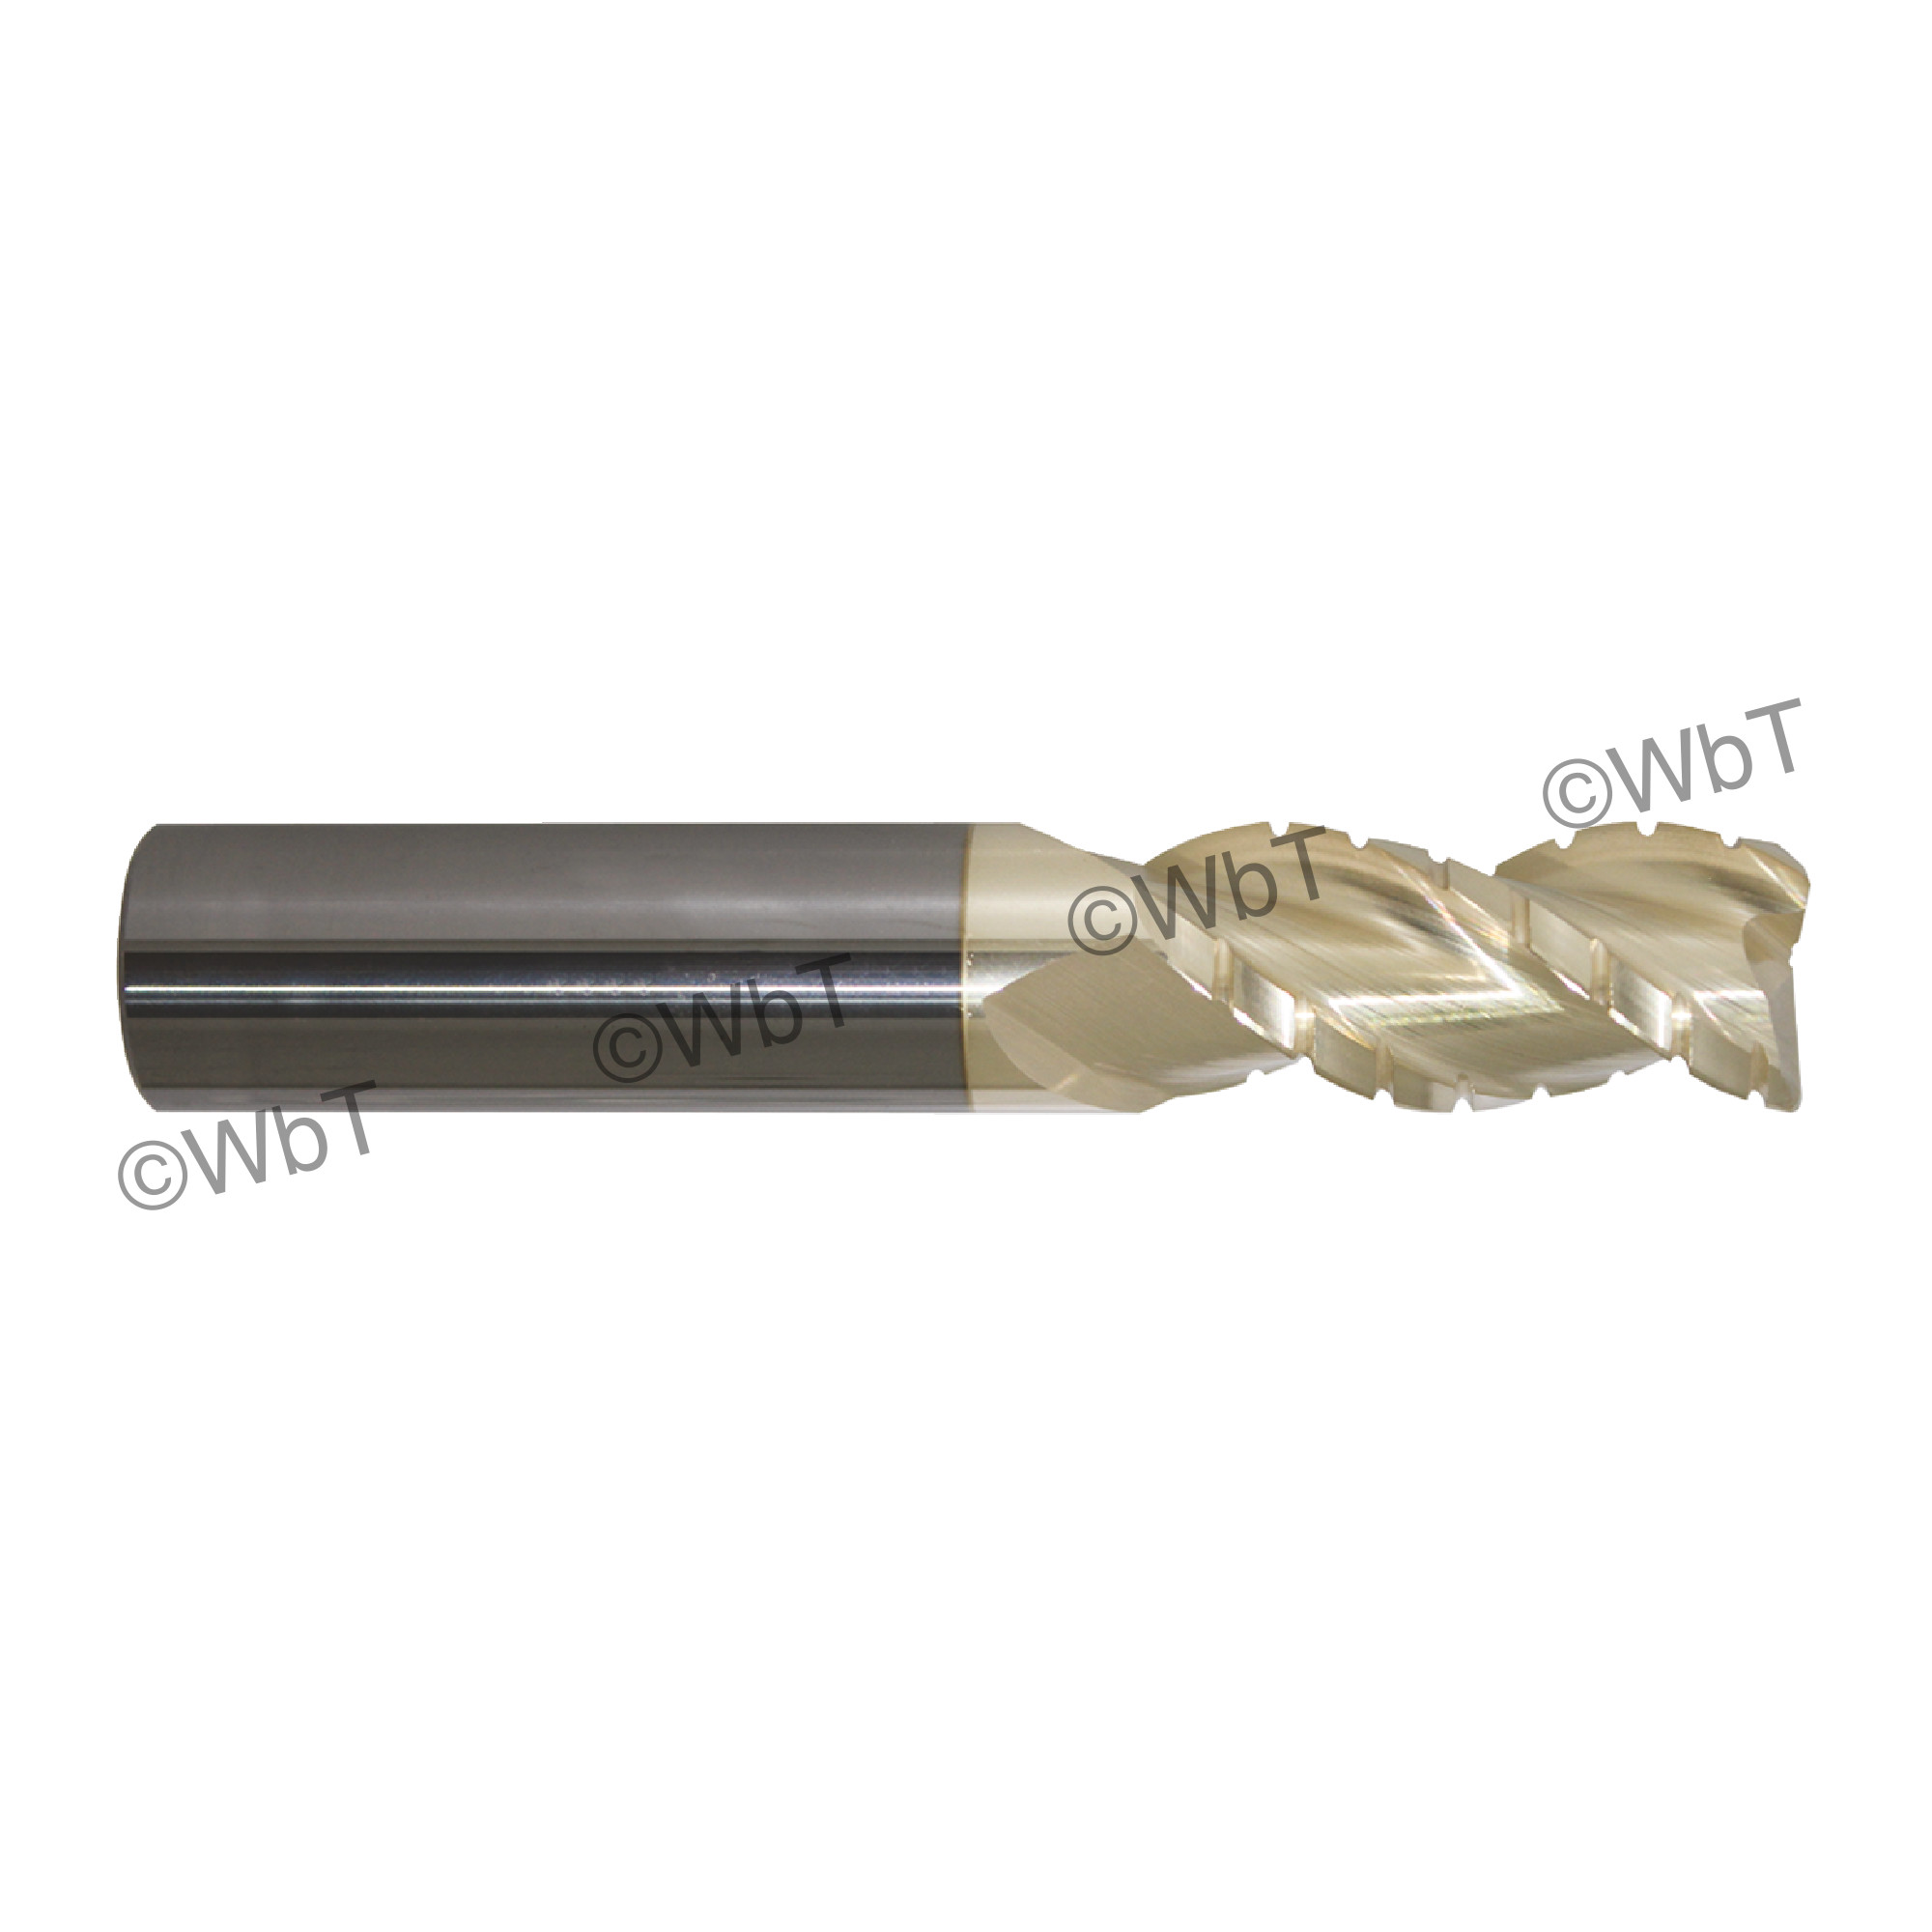 Promax Solid Carbide 3 Flute Roughing-Finishing Corner Radius End Mill 1/2" 119-03226 Series 119